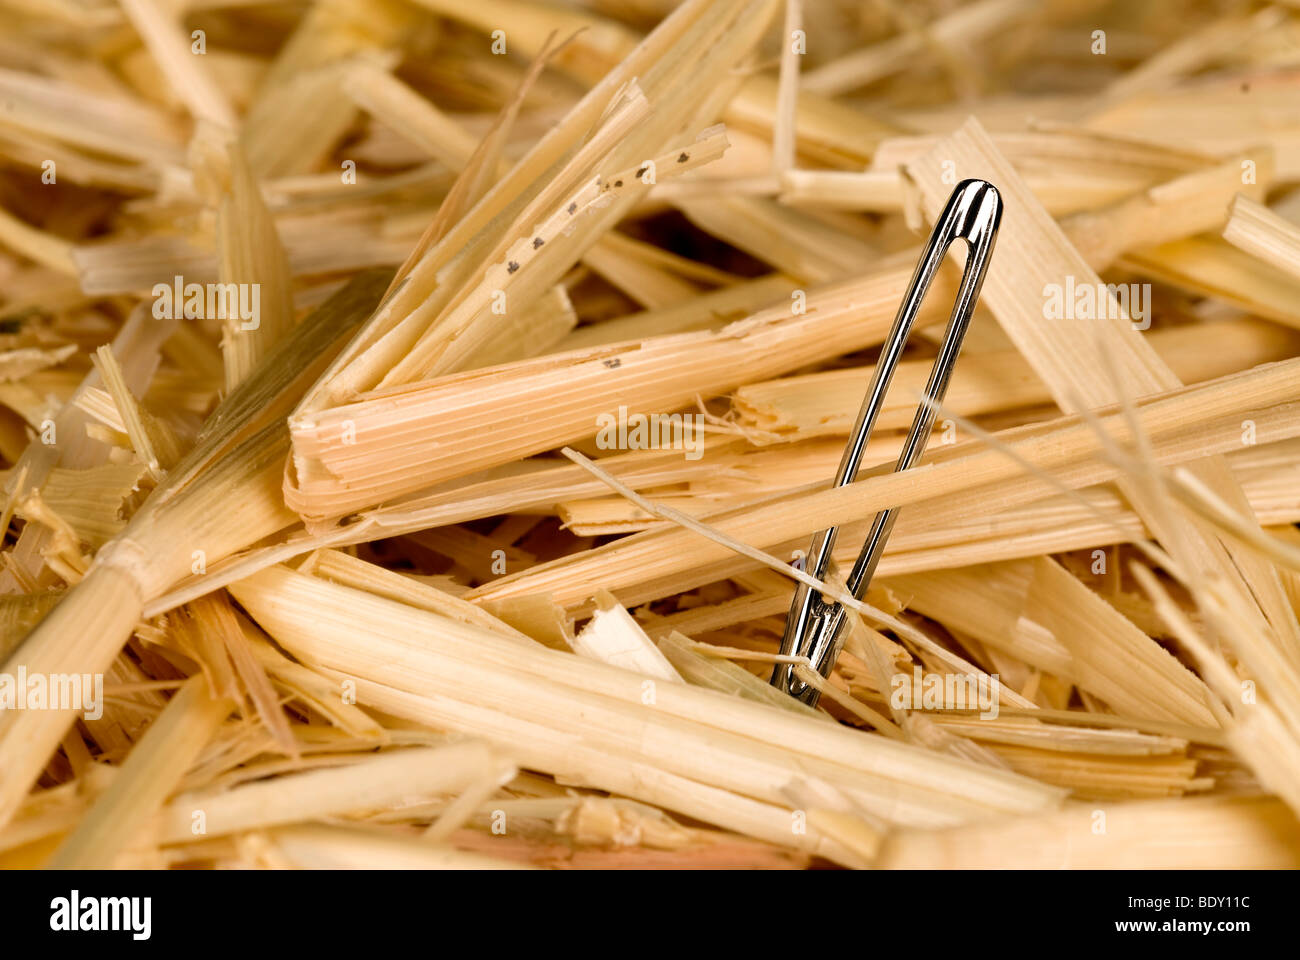 A needle is found in a haystack. Stock Photo